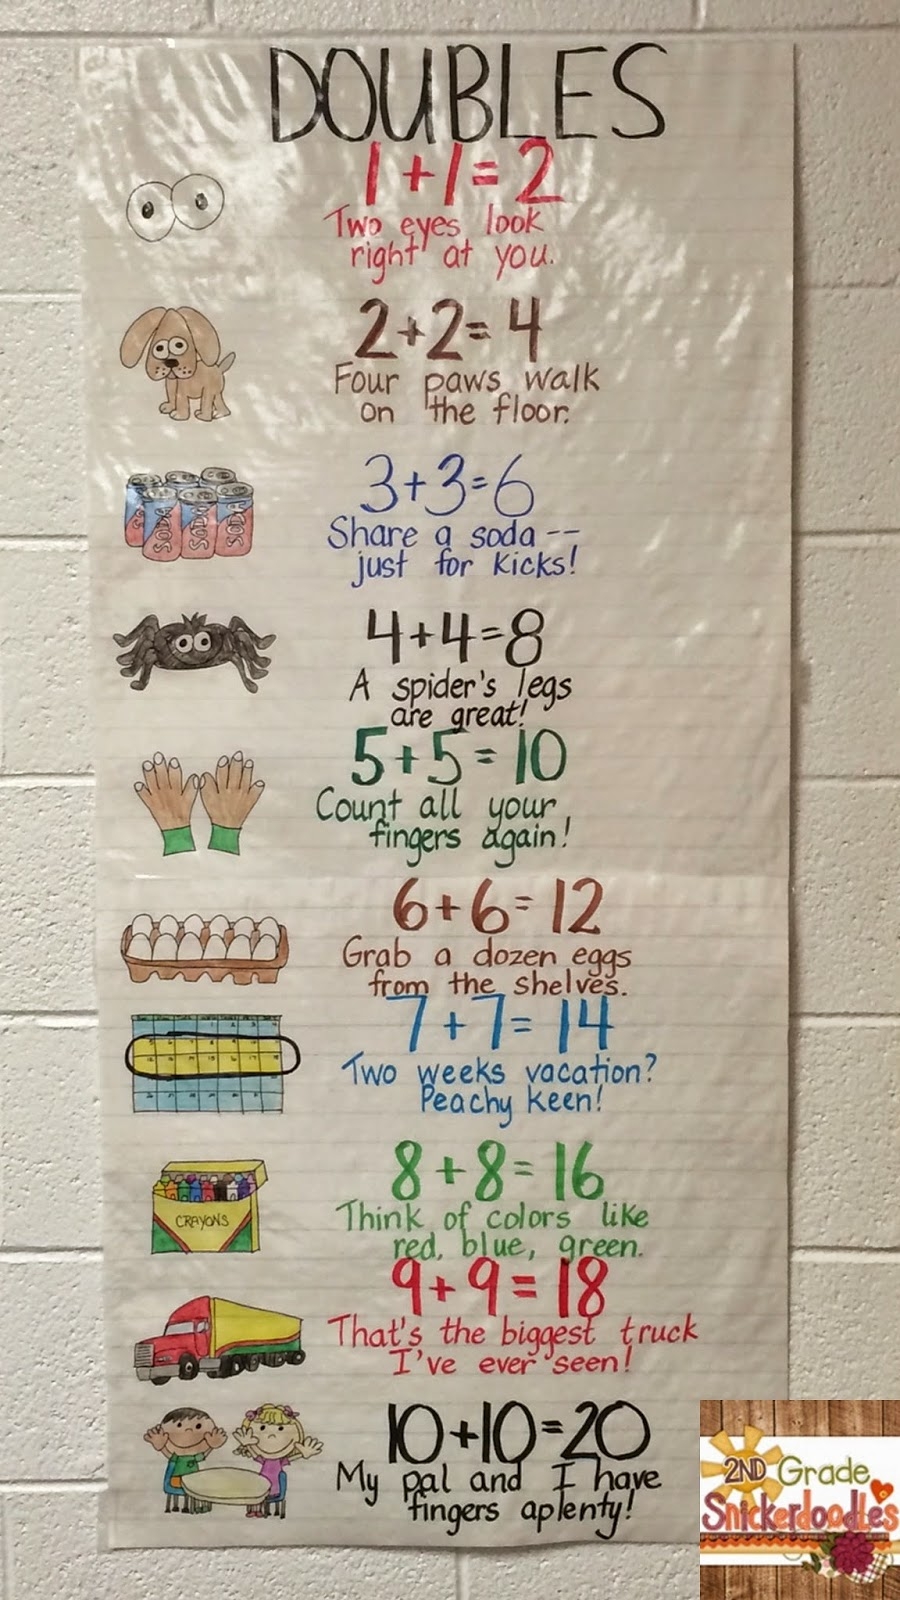 2nd Grade Snickerdoodles Doubles Facts Freebie